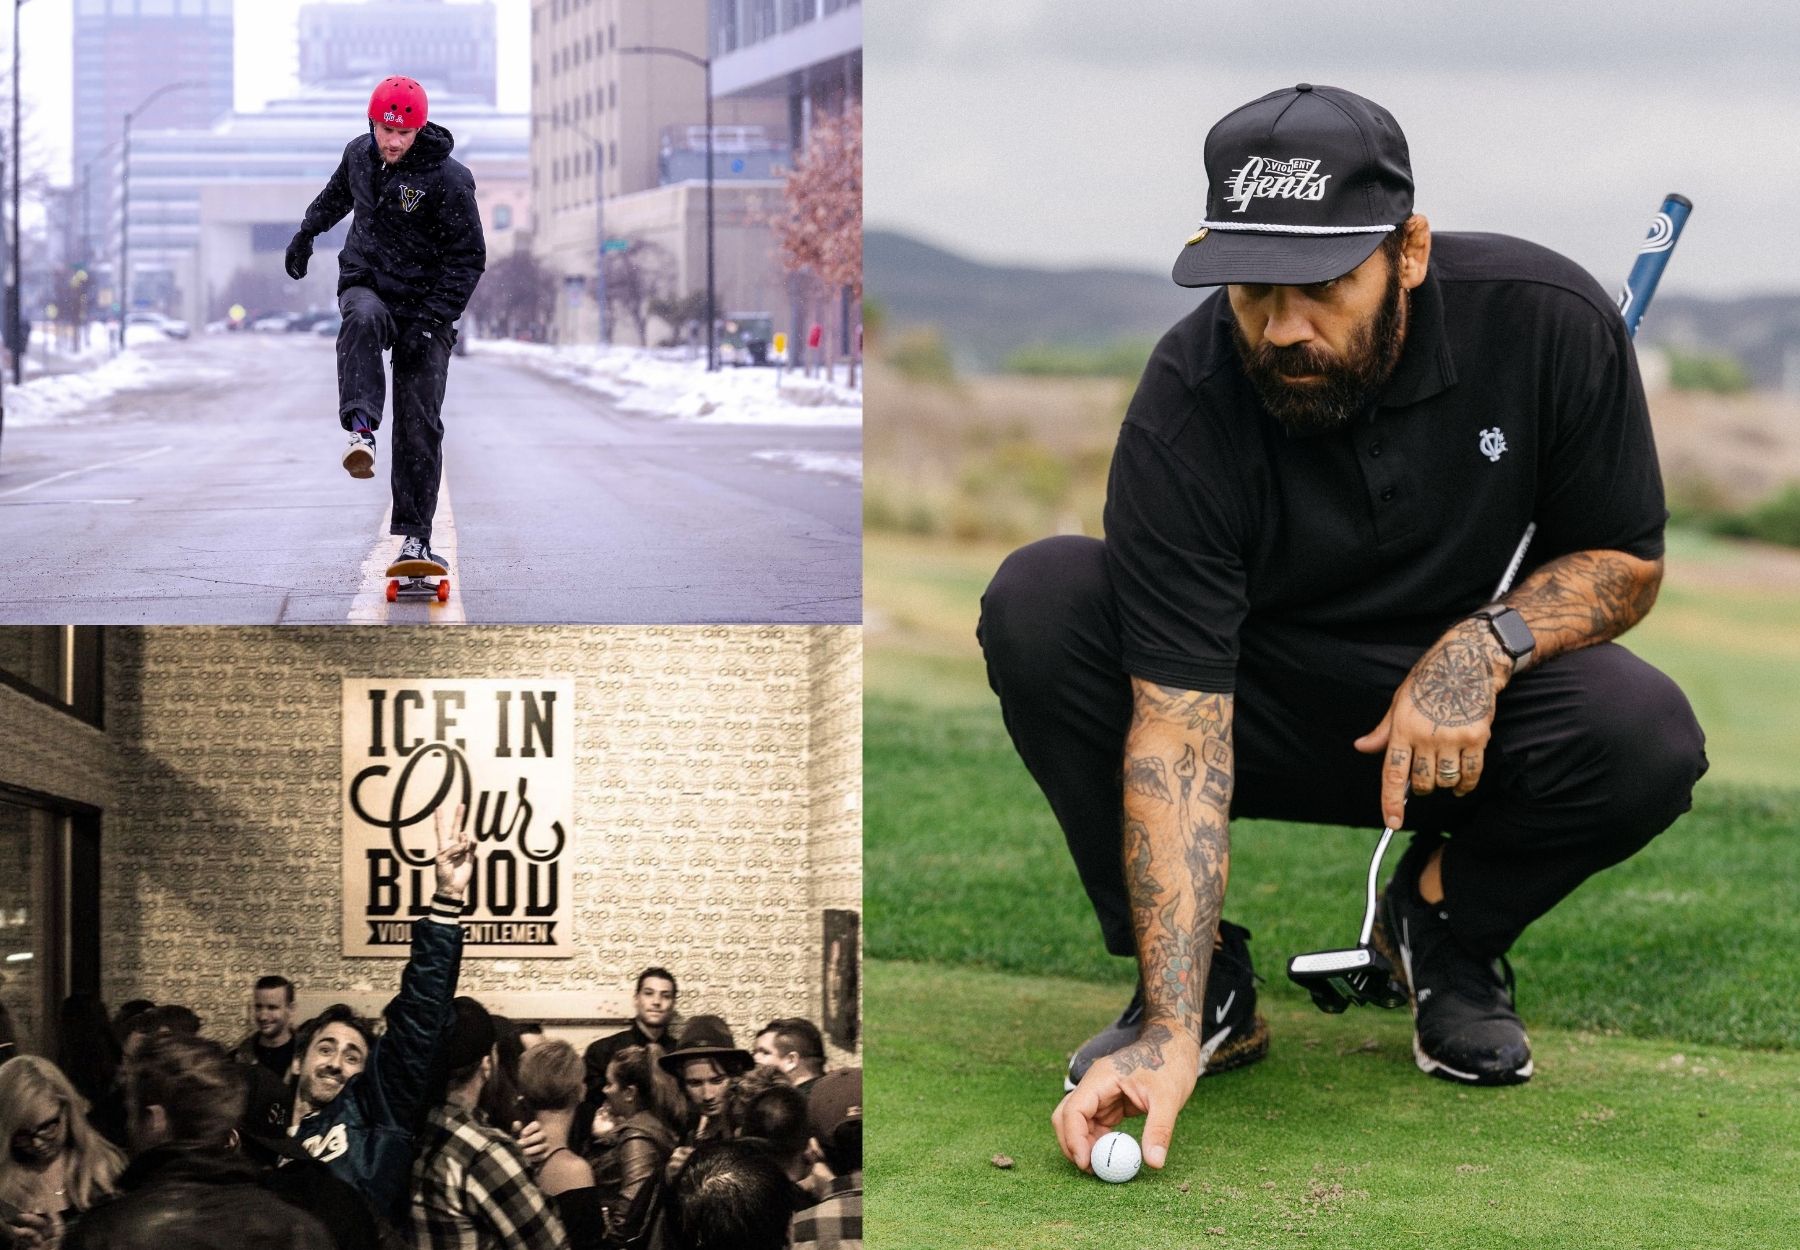 Don't miss fun partnerships, such as the Delseyfly metoparis x Mike Vallely, the Tim Hendrick/VGHC event or their new golf line.